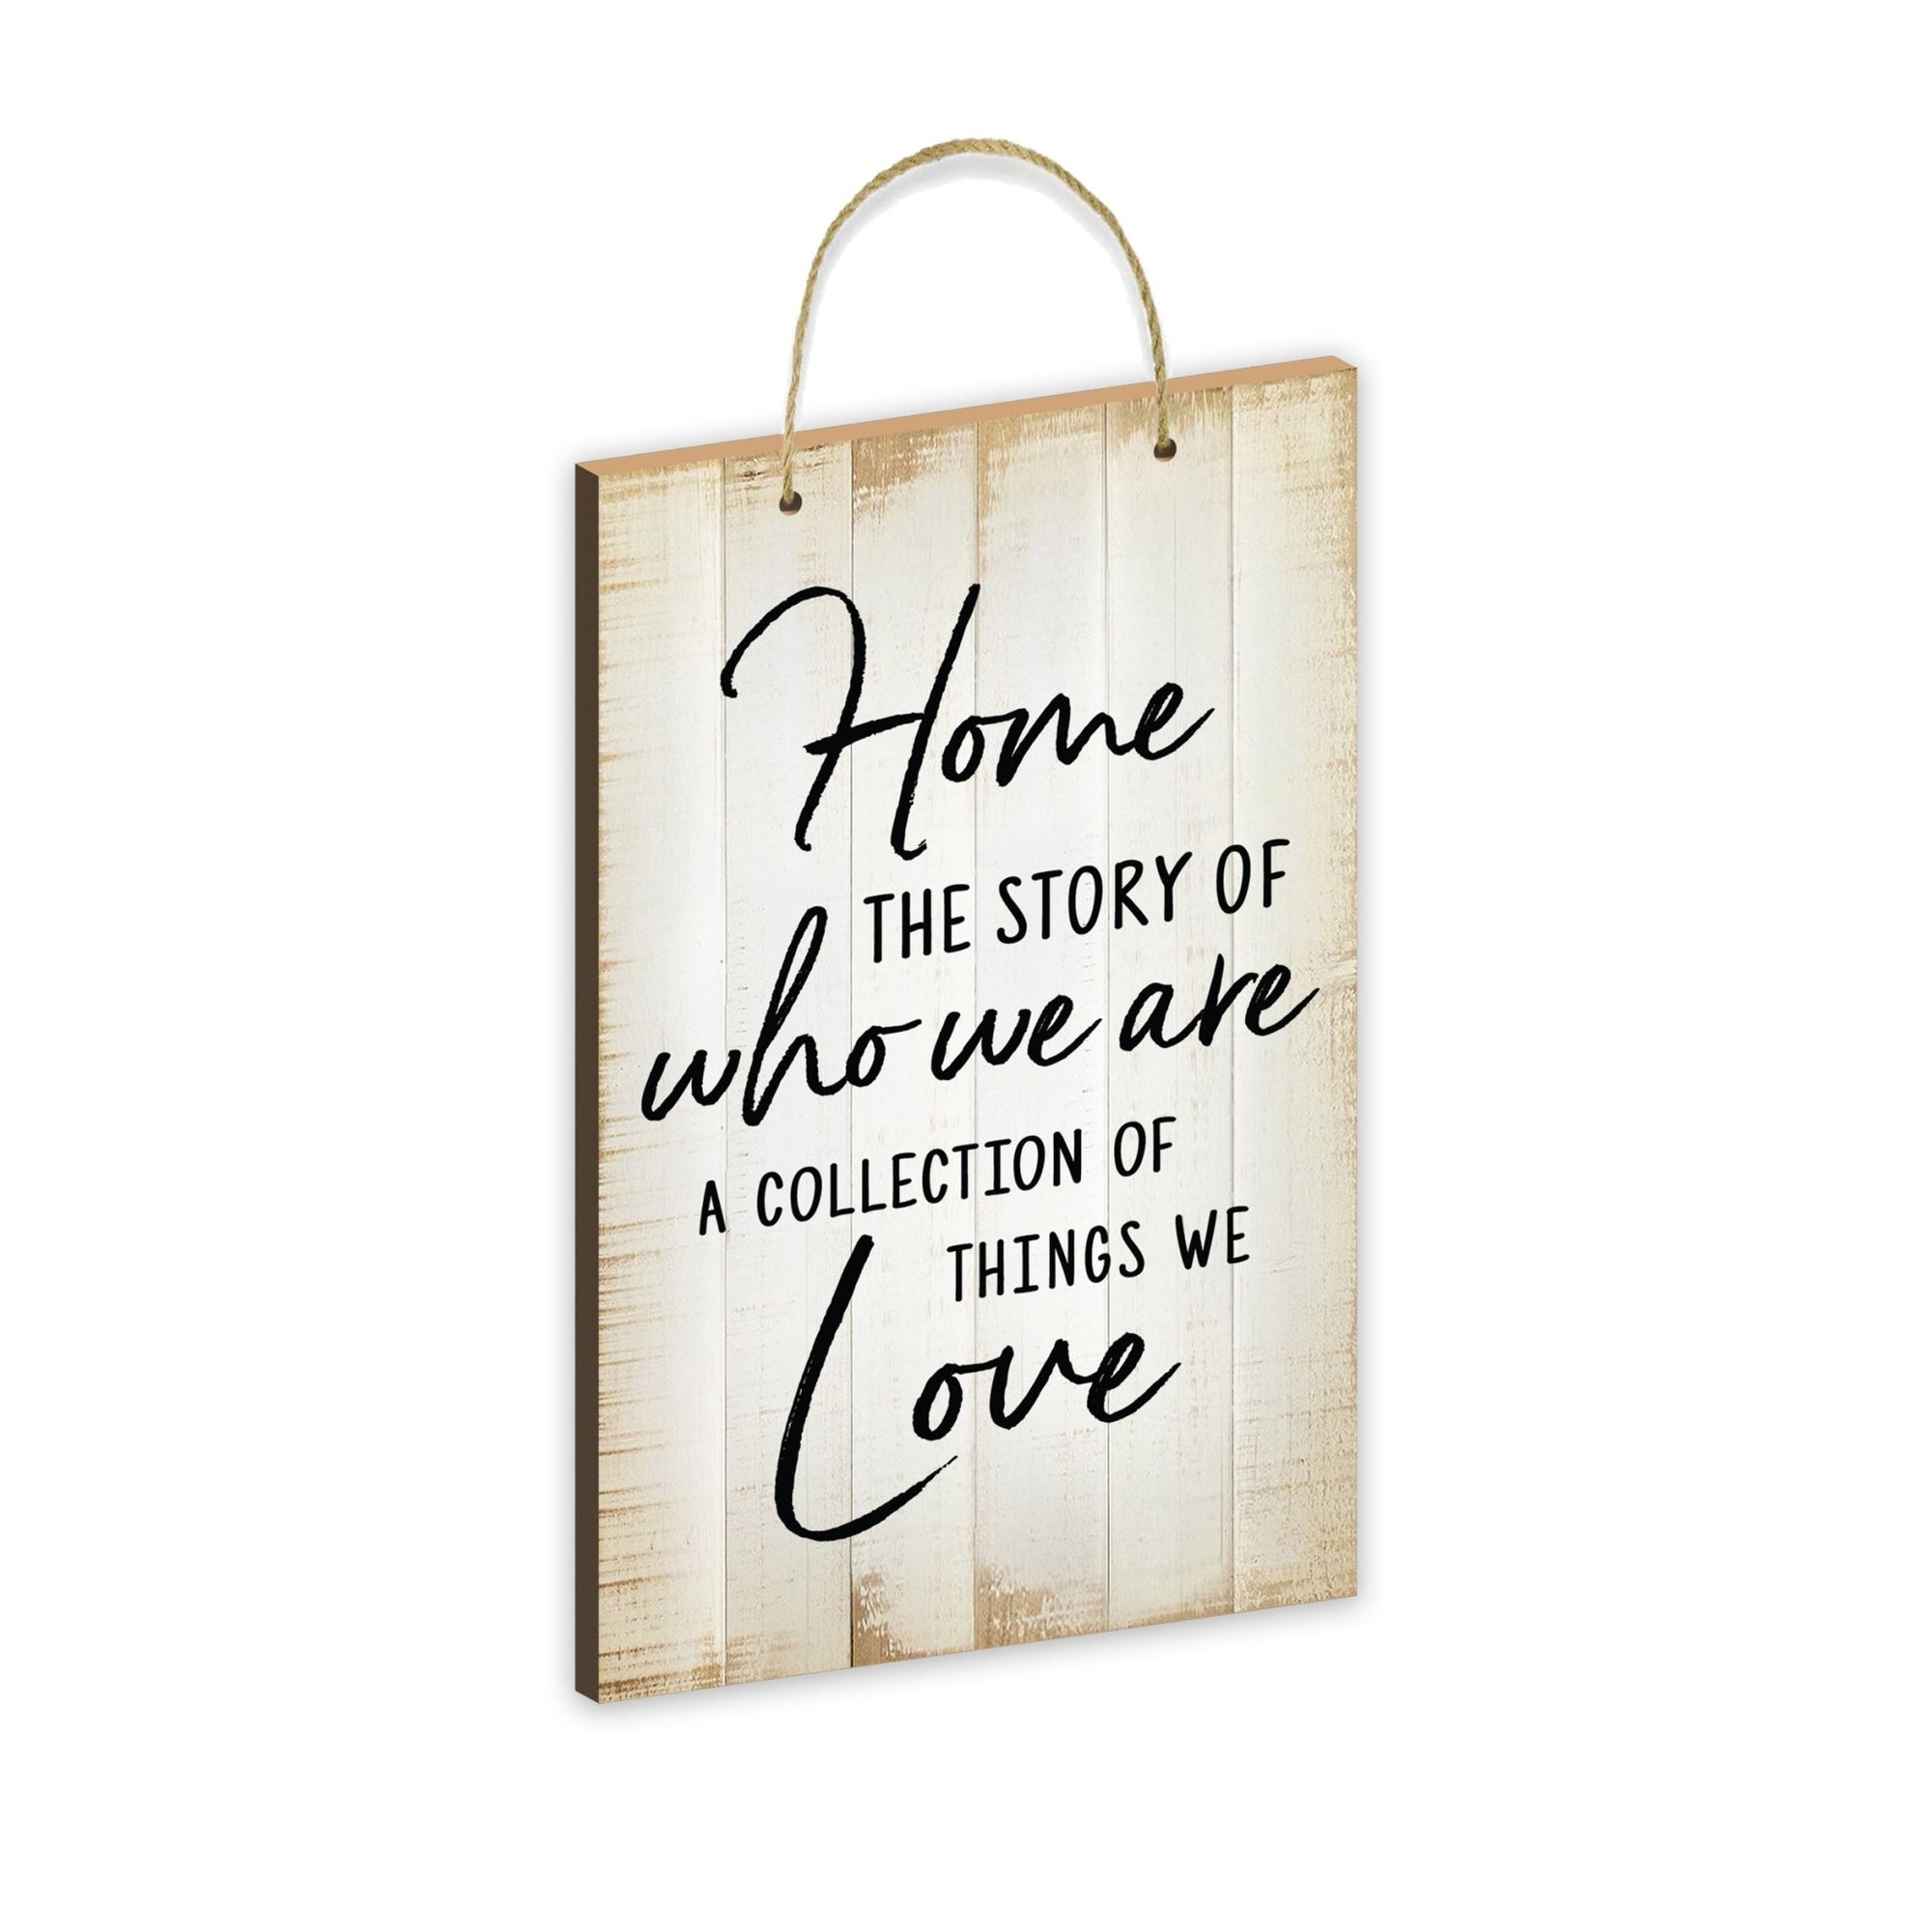 Inspirational Rustic Wooden Wall Hanging Rope Sign Kitchen Décor - The Story Of Who We Are